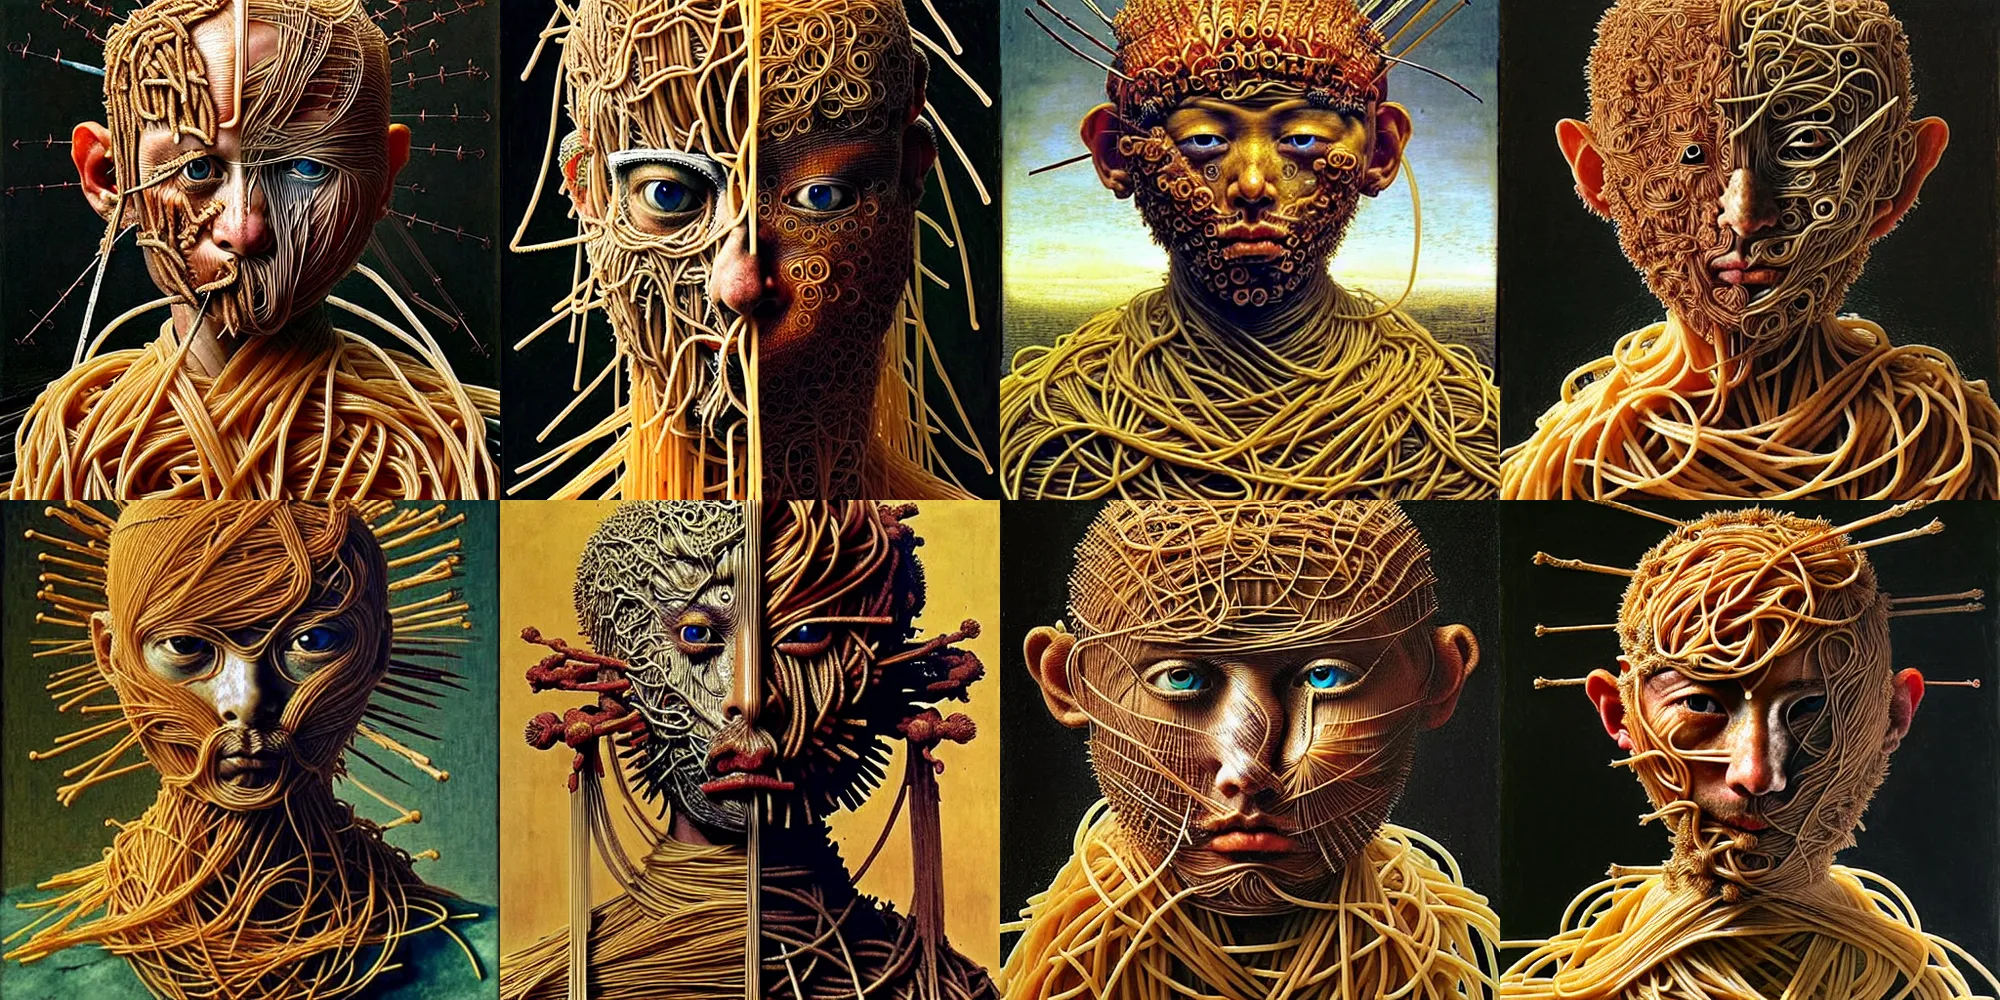 Prompt: half boy half rhibo made of spaghetti, intricate armor made of spaghetti fractals, ancient warrior, samurai style, by giuseppe arcimboldo and ambrosius benson, renaissance, intricate and wet oil paint, a touch of beksinski, realistic